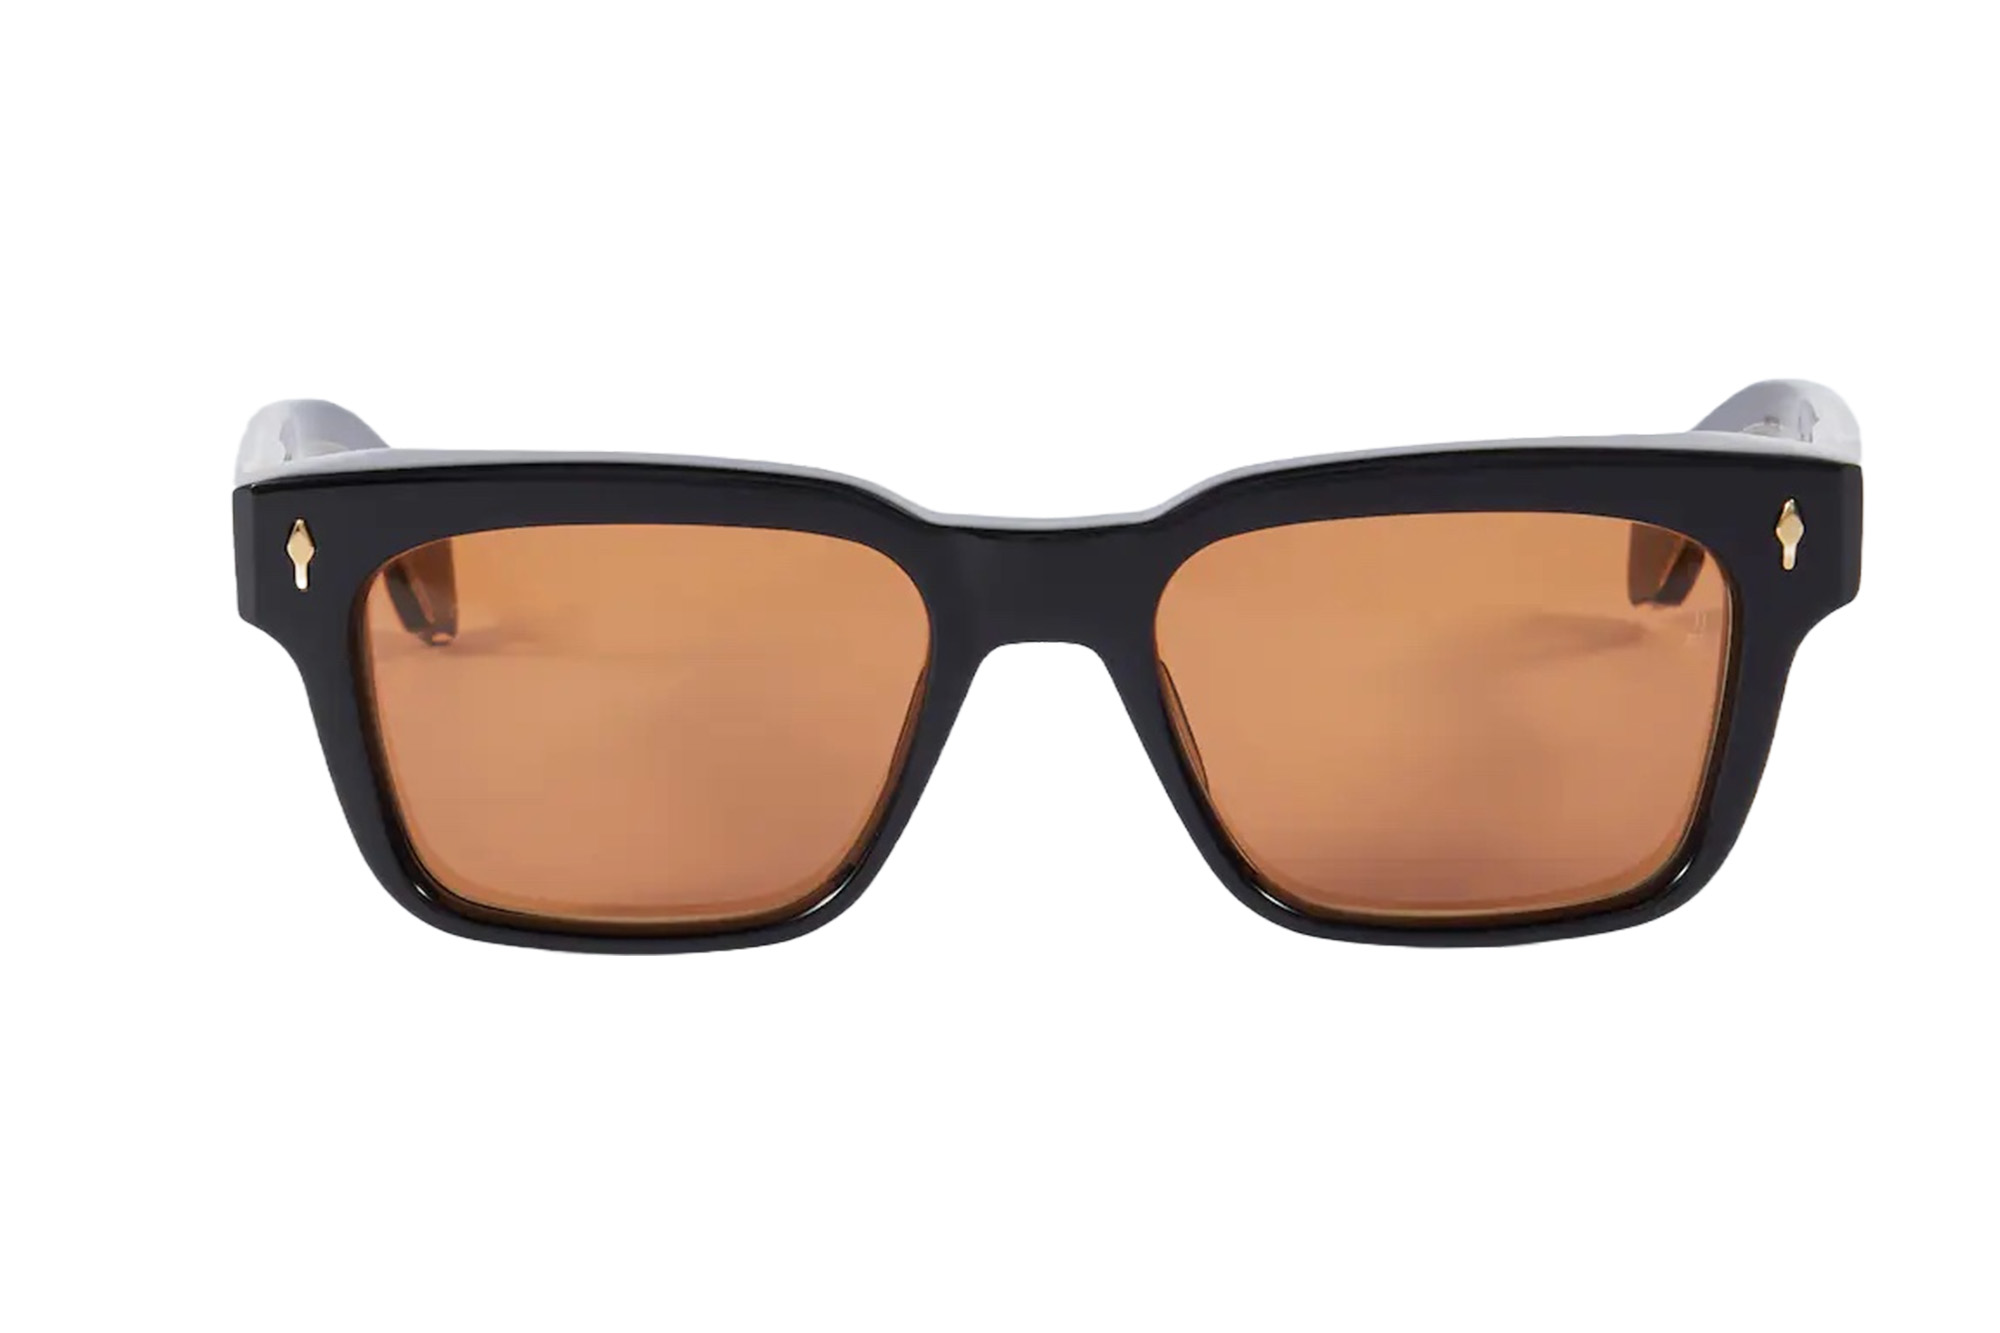 A pair of tinted sunglasses